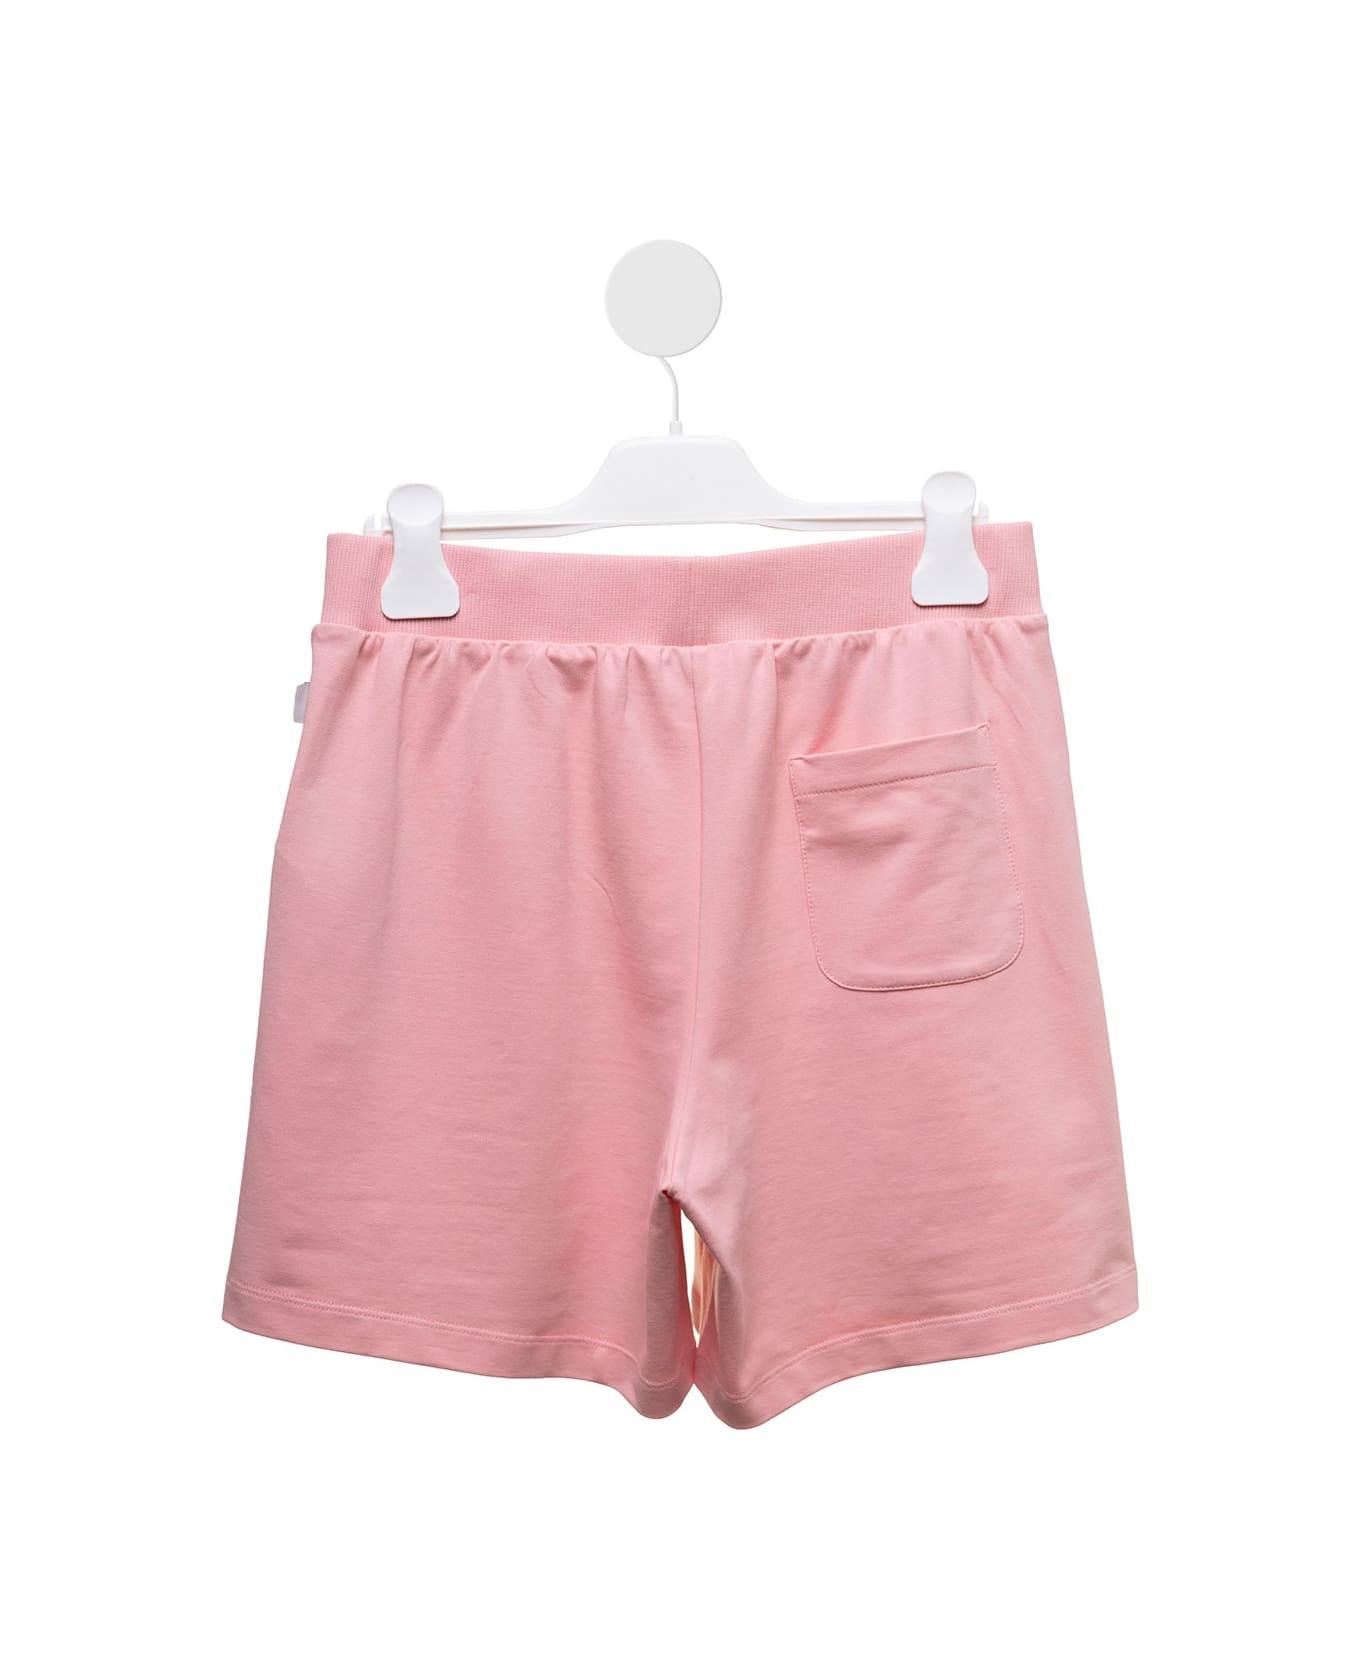 GCDS Mini Gds Girl's Pink Cotton Shorts With Logo - Pink